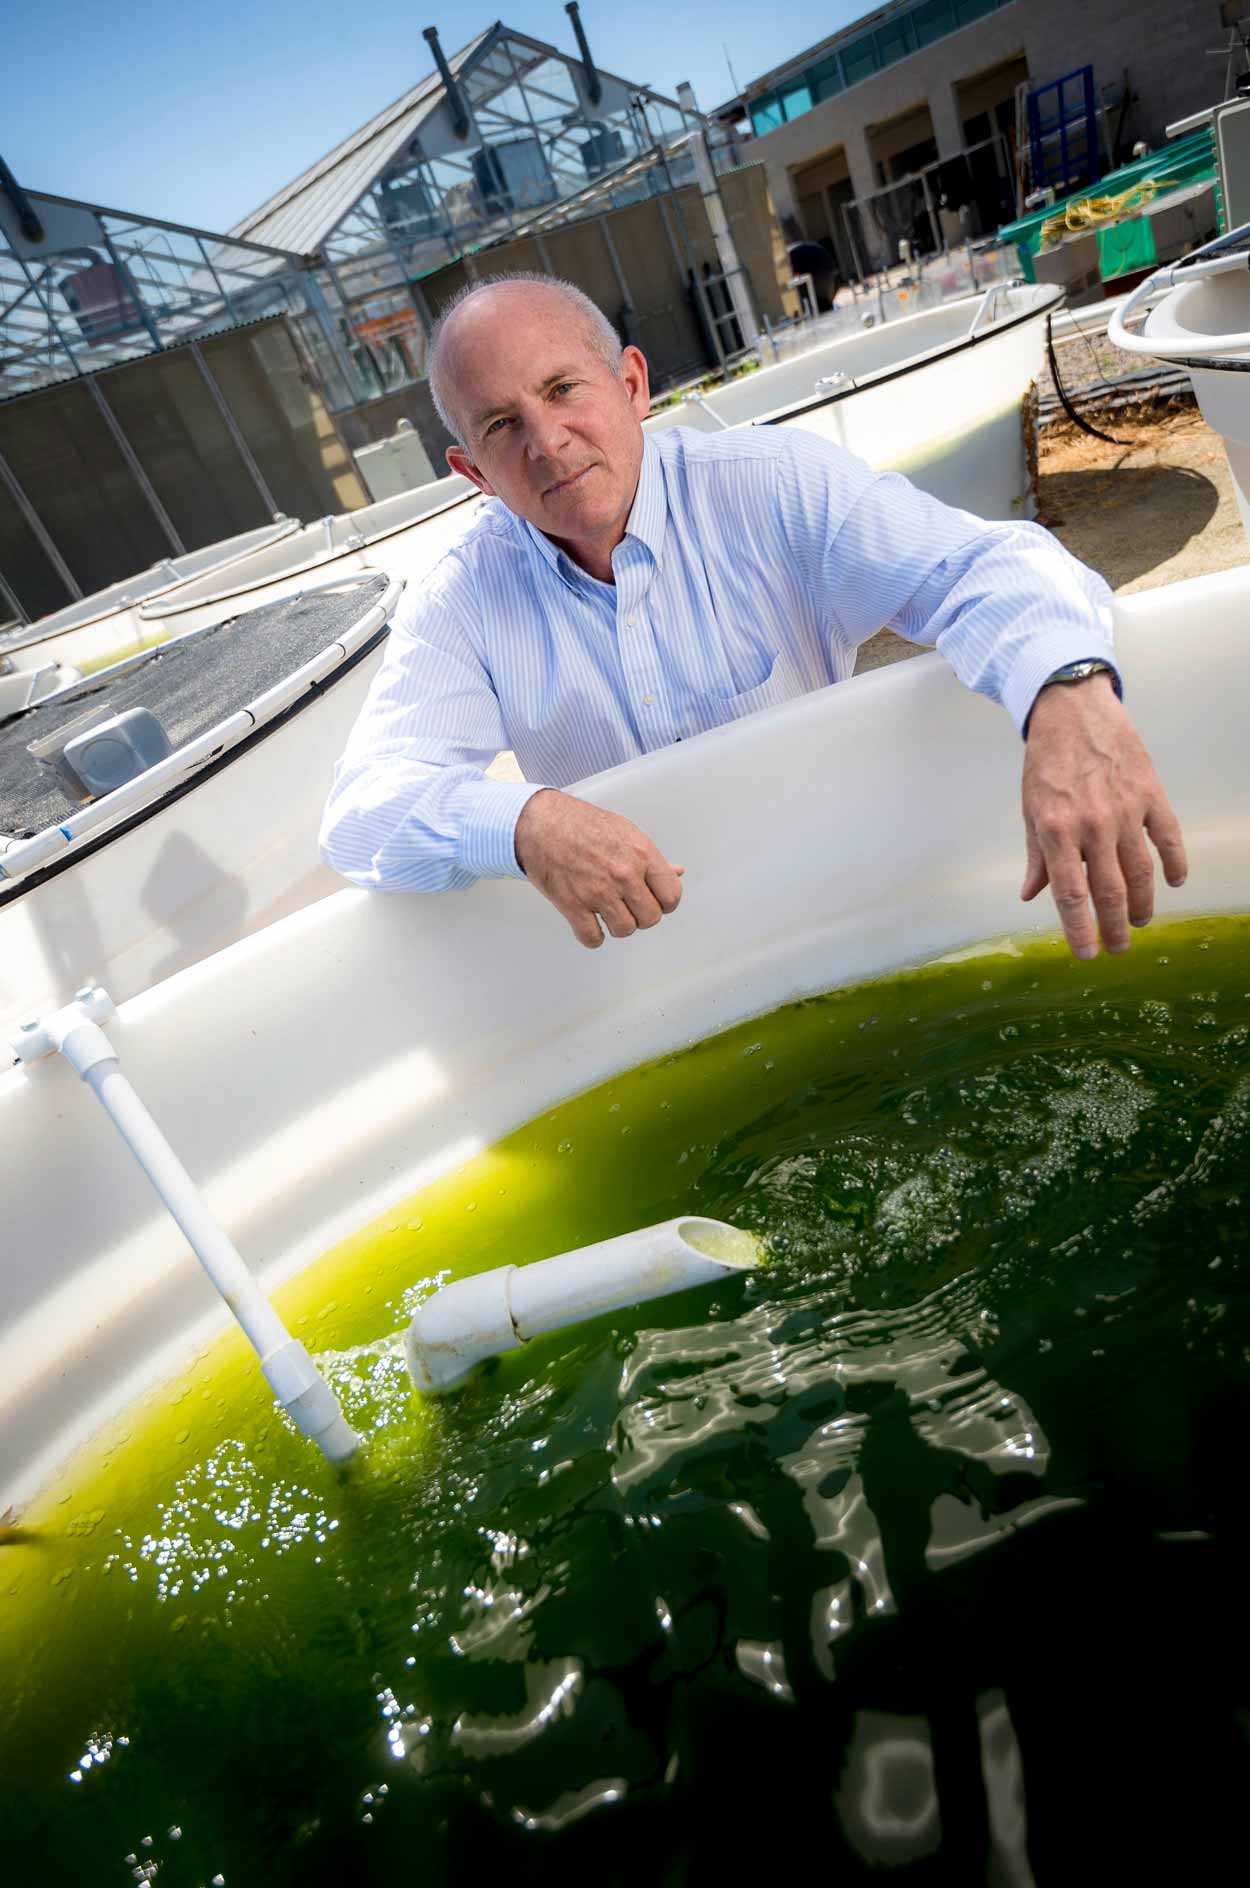 Stephan Mayfield posing for a photo with large outdoor bio-algae tanks